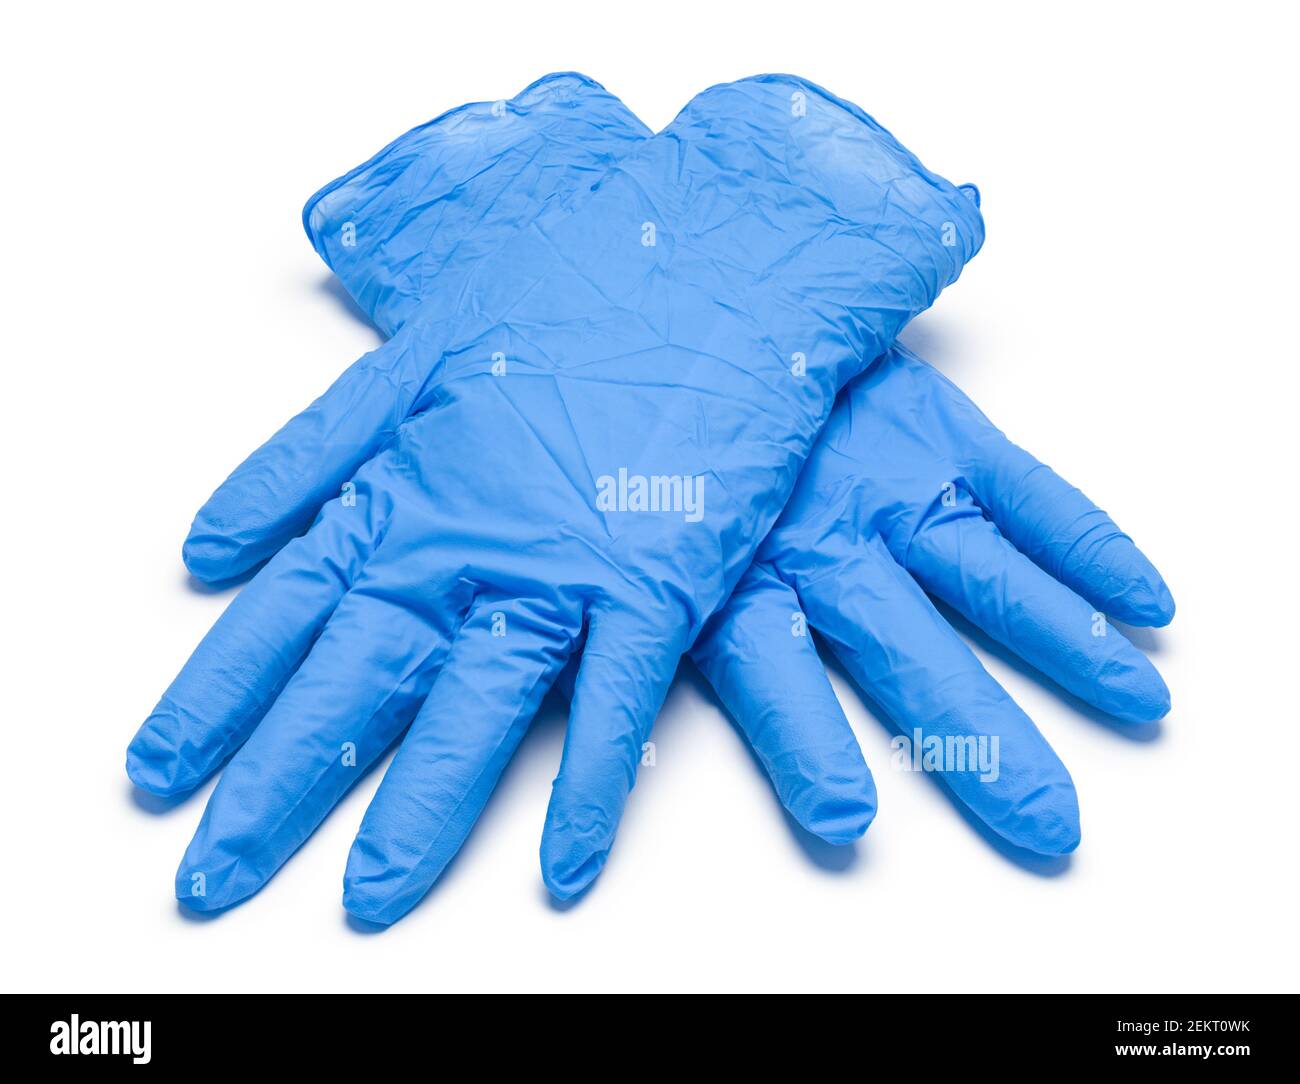 Blue Medical Gloves Cut Out On White. Stock Photo